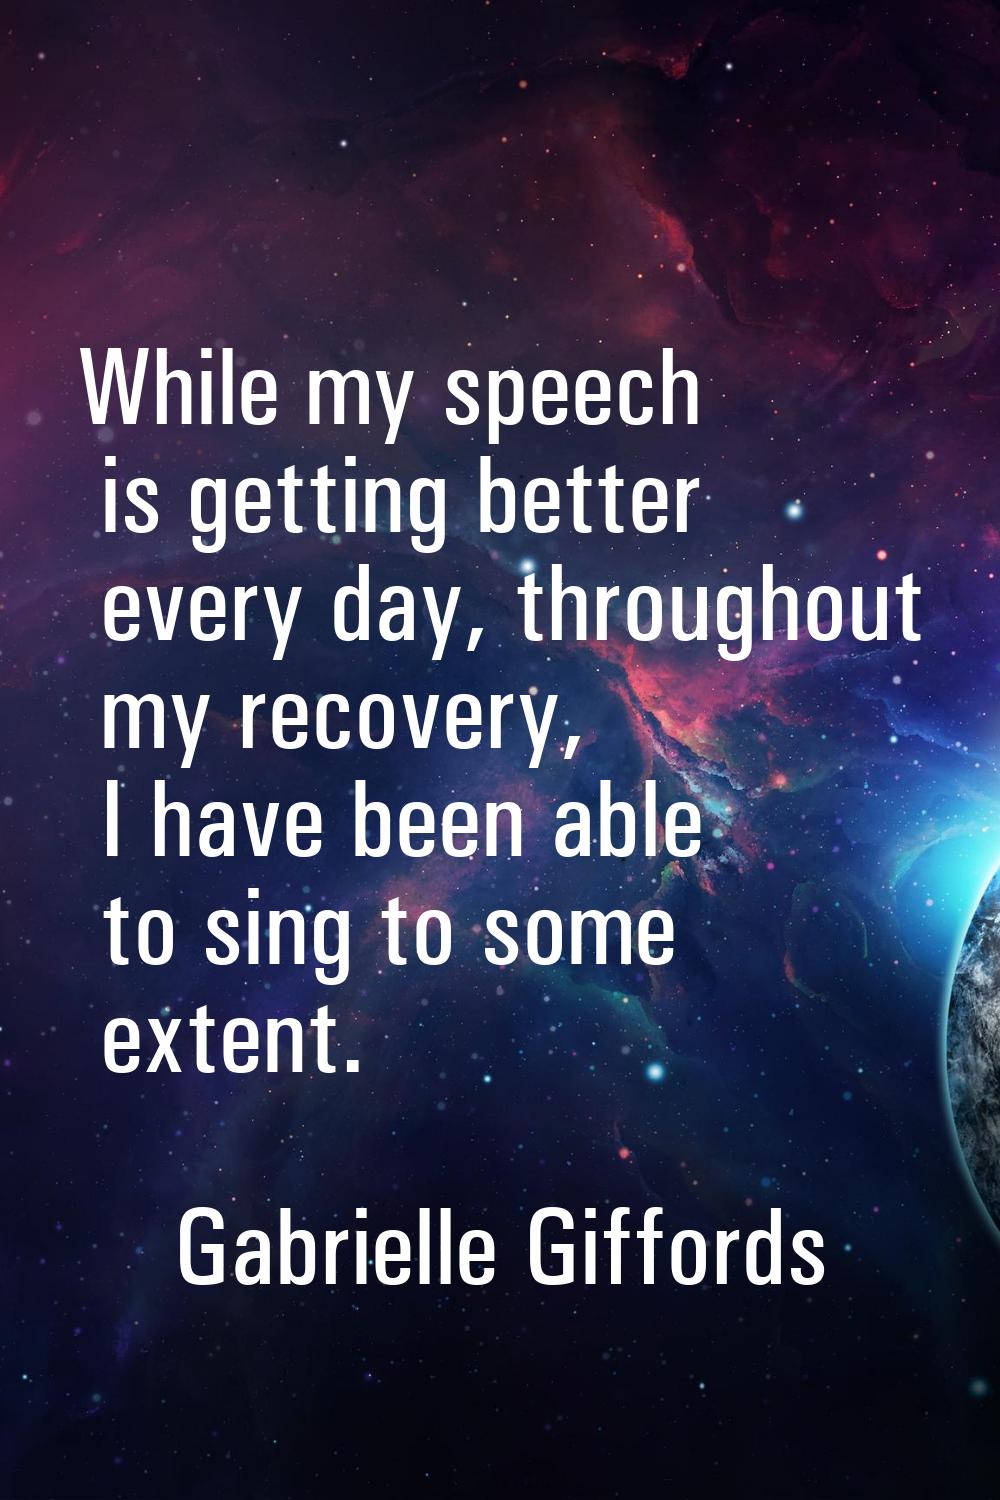 While my speech is getting better every day, throughout my recovery, I have been able to sing to so